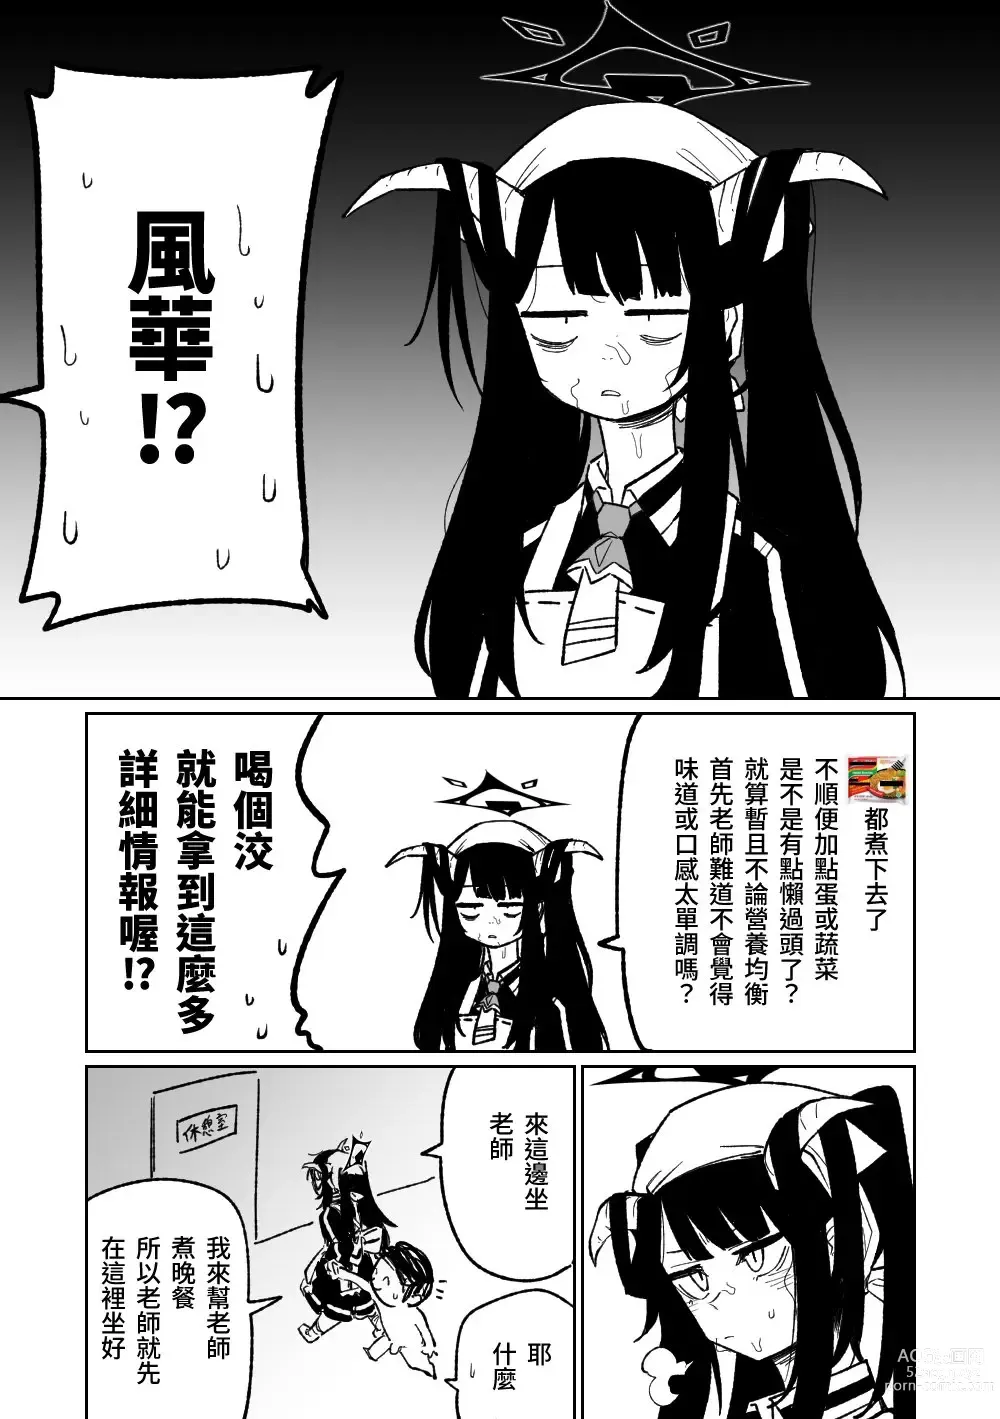 Page 4 of doujinshi 風華的飲食管理